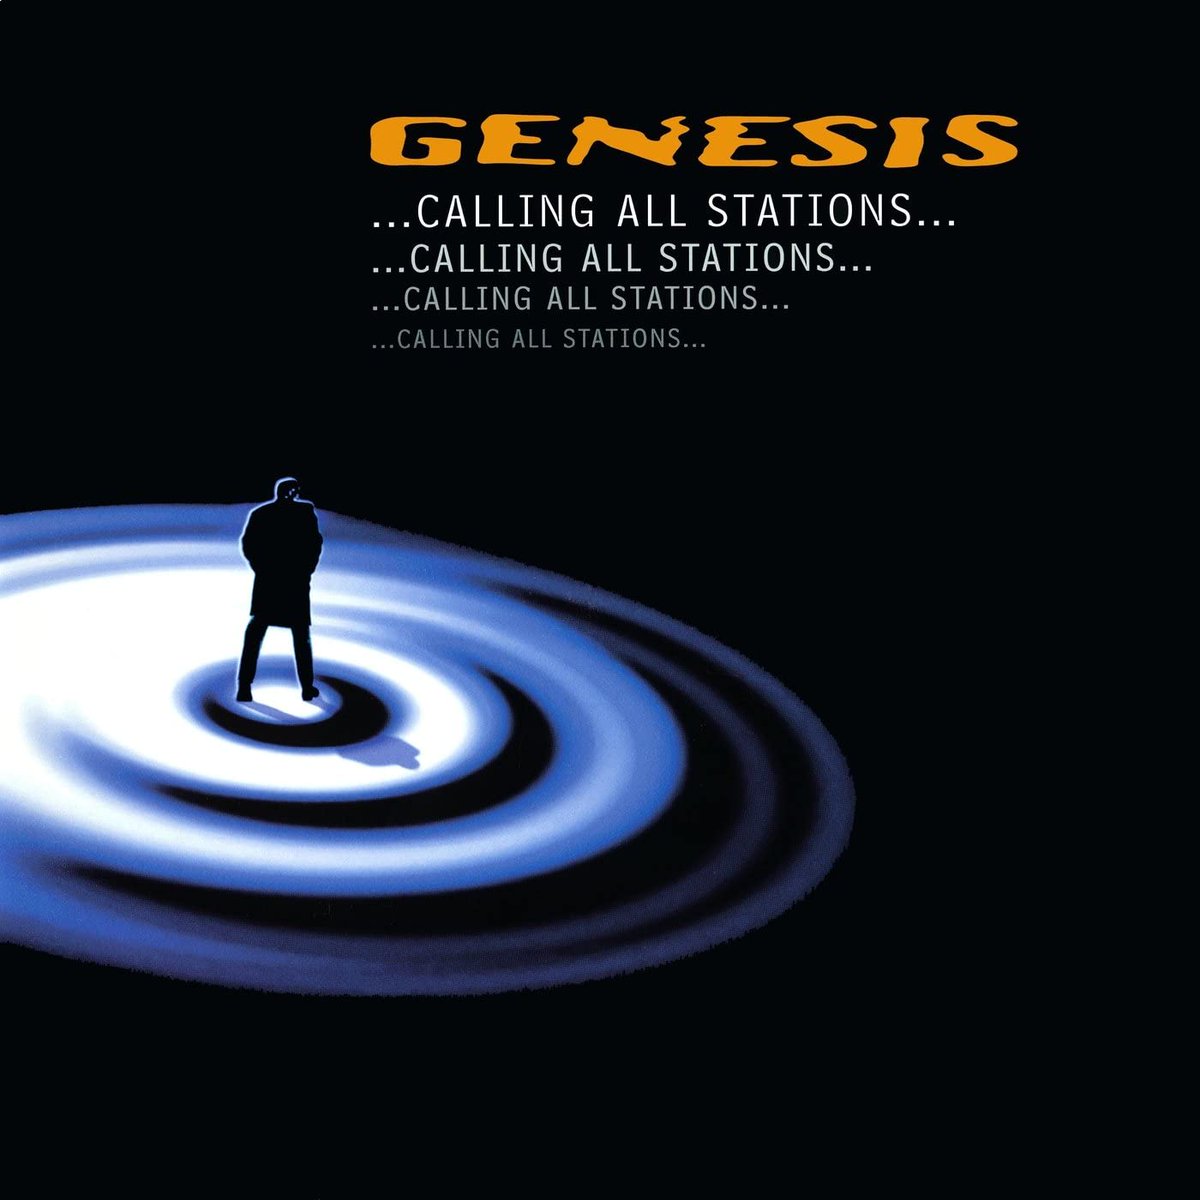 14. Calling All Stations (1997) CALLING ALL STATIONS - great showcase for Ray Wilson's vocals THE DIVIDING LINE - brilliant live song with the extended intro/guitar duel Credit to them for trying to start fresh, but the rest of the album tracks aren't really for me.